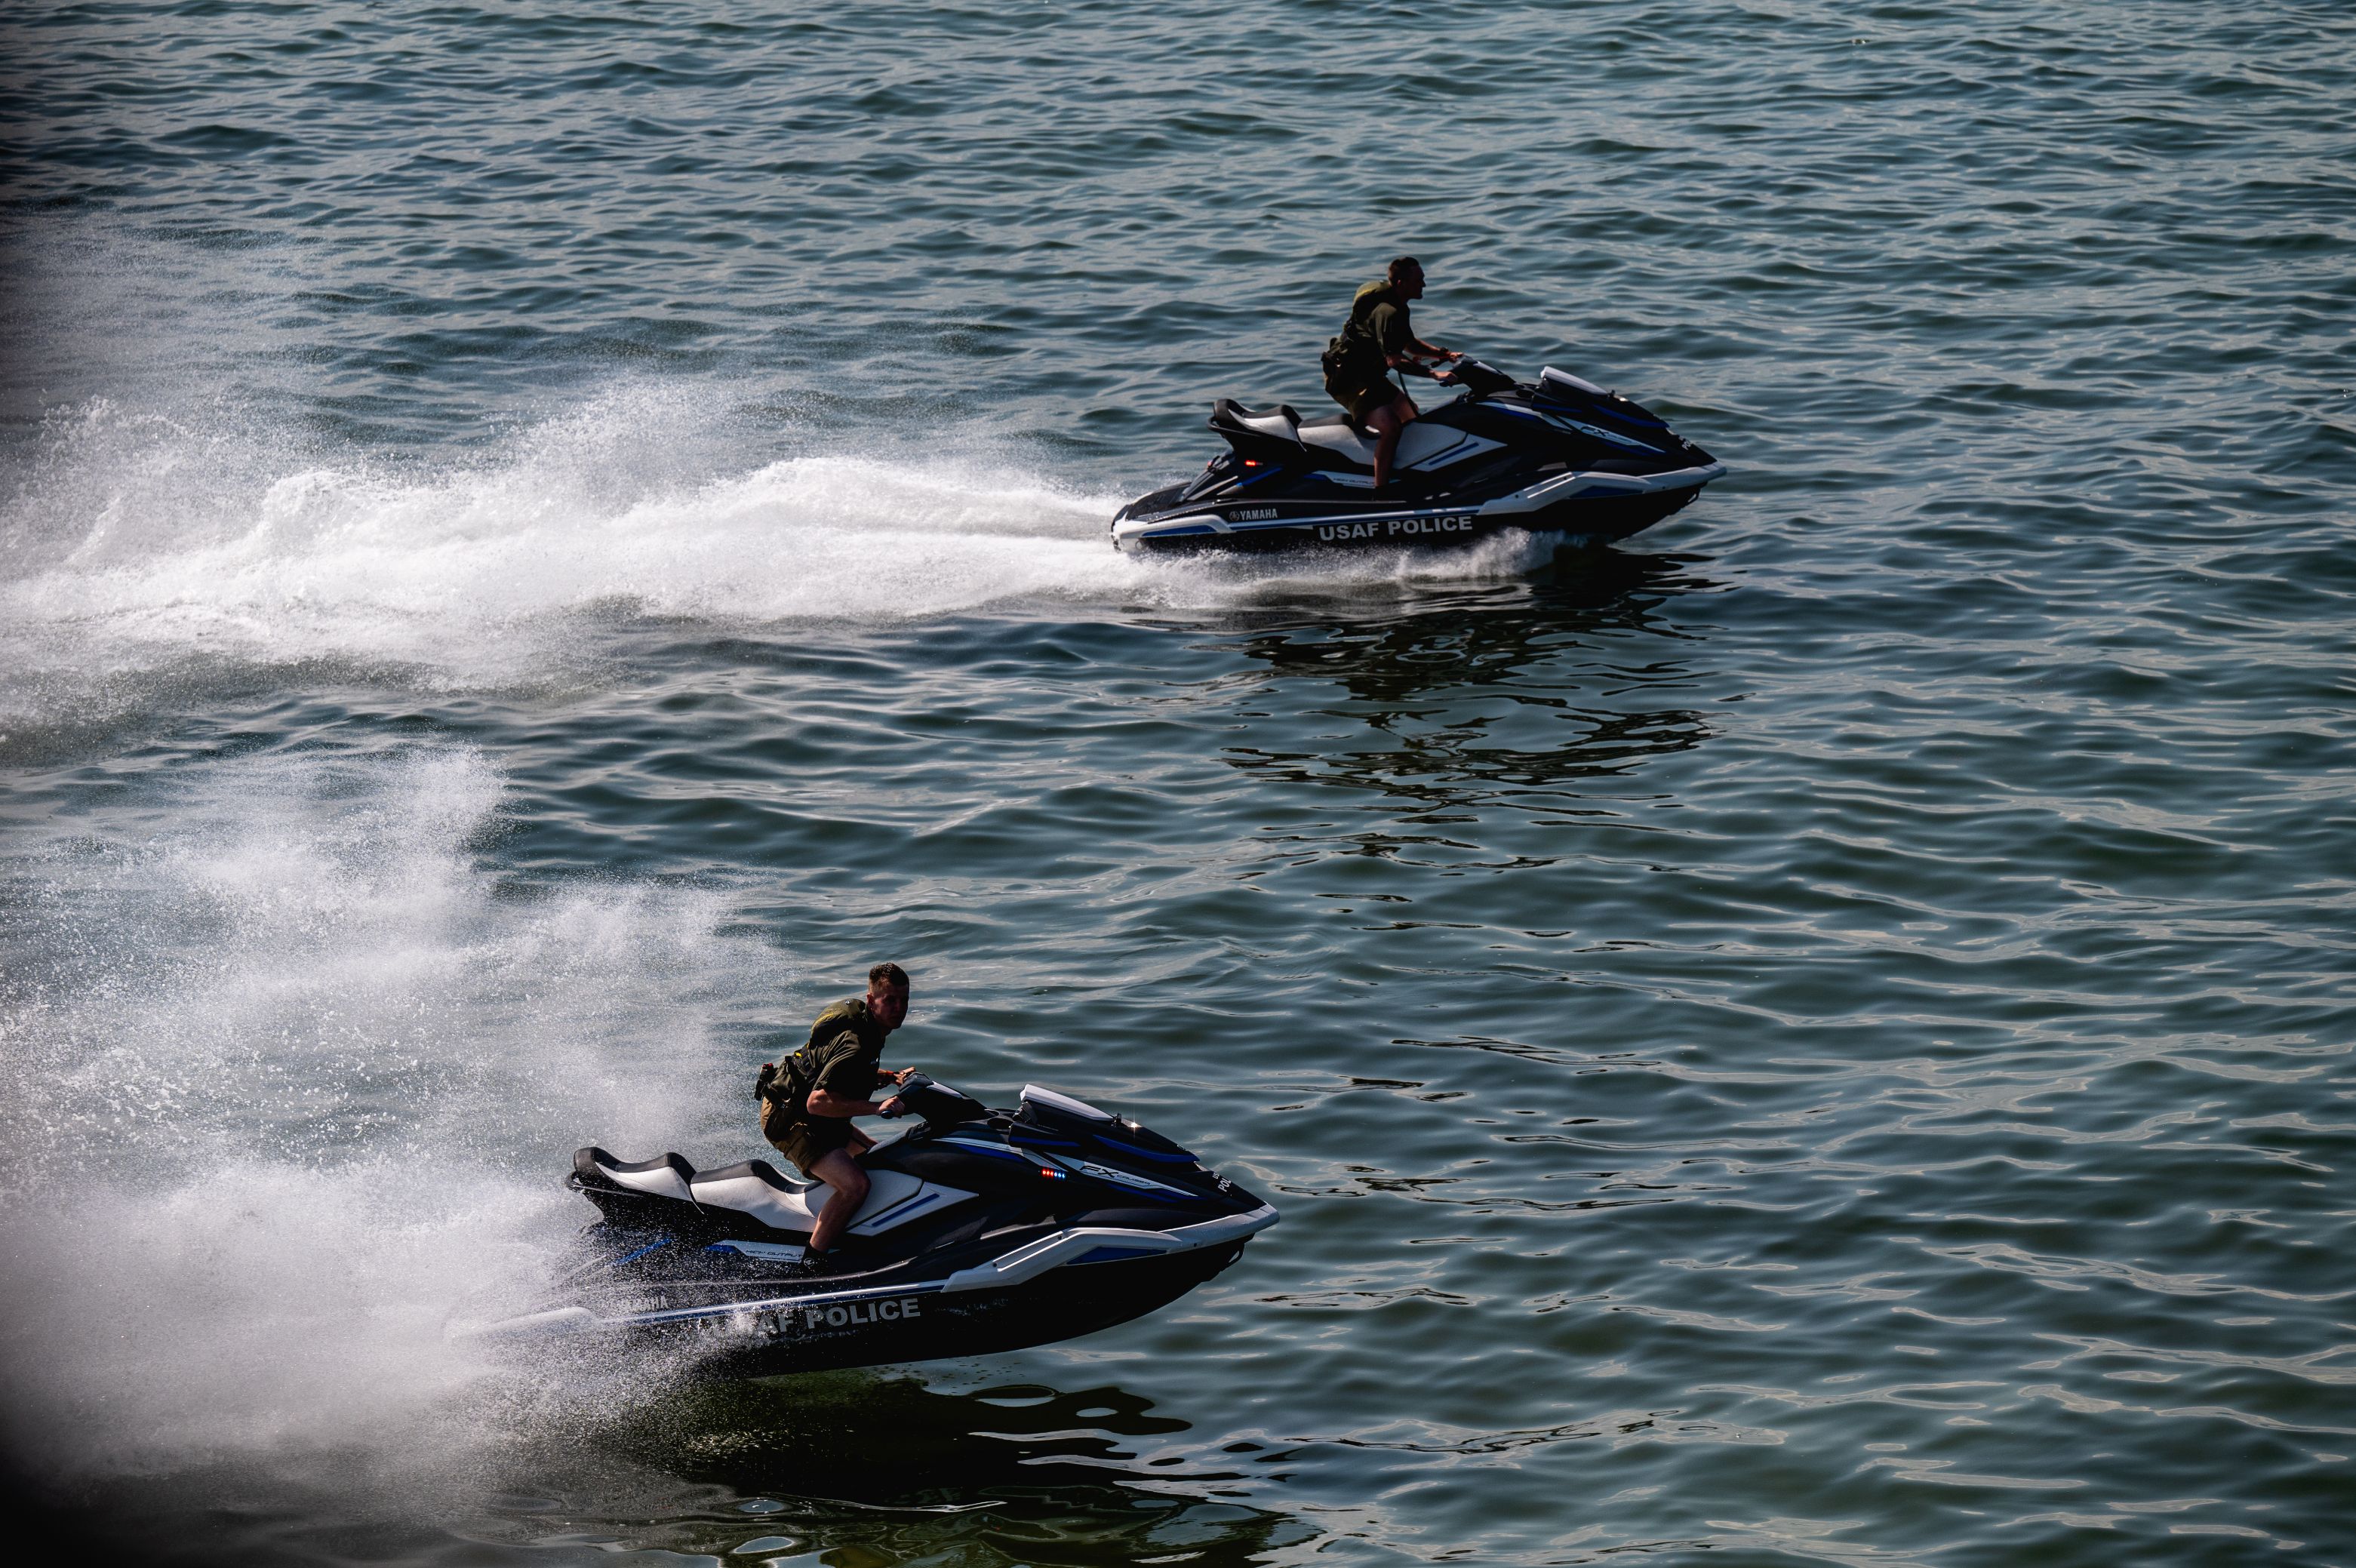 U.S. marine patrolmen assigned to the 6th Security Forces Squadron operate jet skis in Hillsborough Bay, Florida, during Operation Neptune Storm May 17, 2023. The operation included assets from the 6th Security Forces Squadron, U.S. Coast Guard, Tampa Fire Rescue, Florida Fish and Wildlife Commission, Tampa Police Department